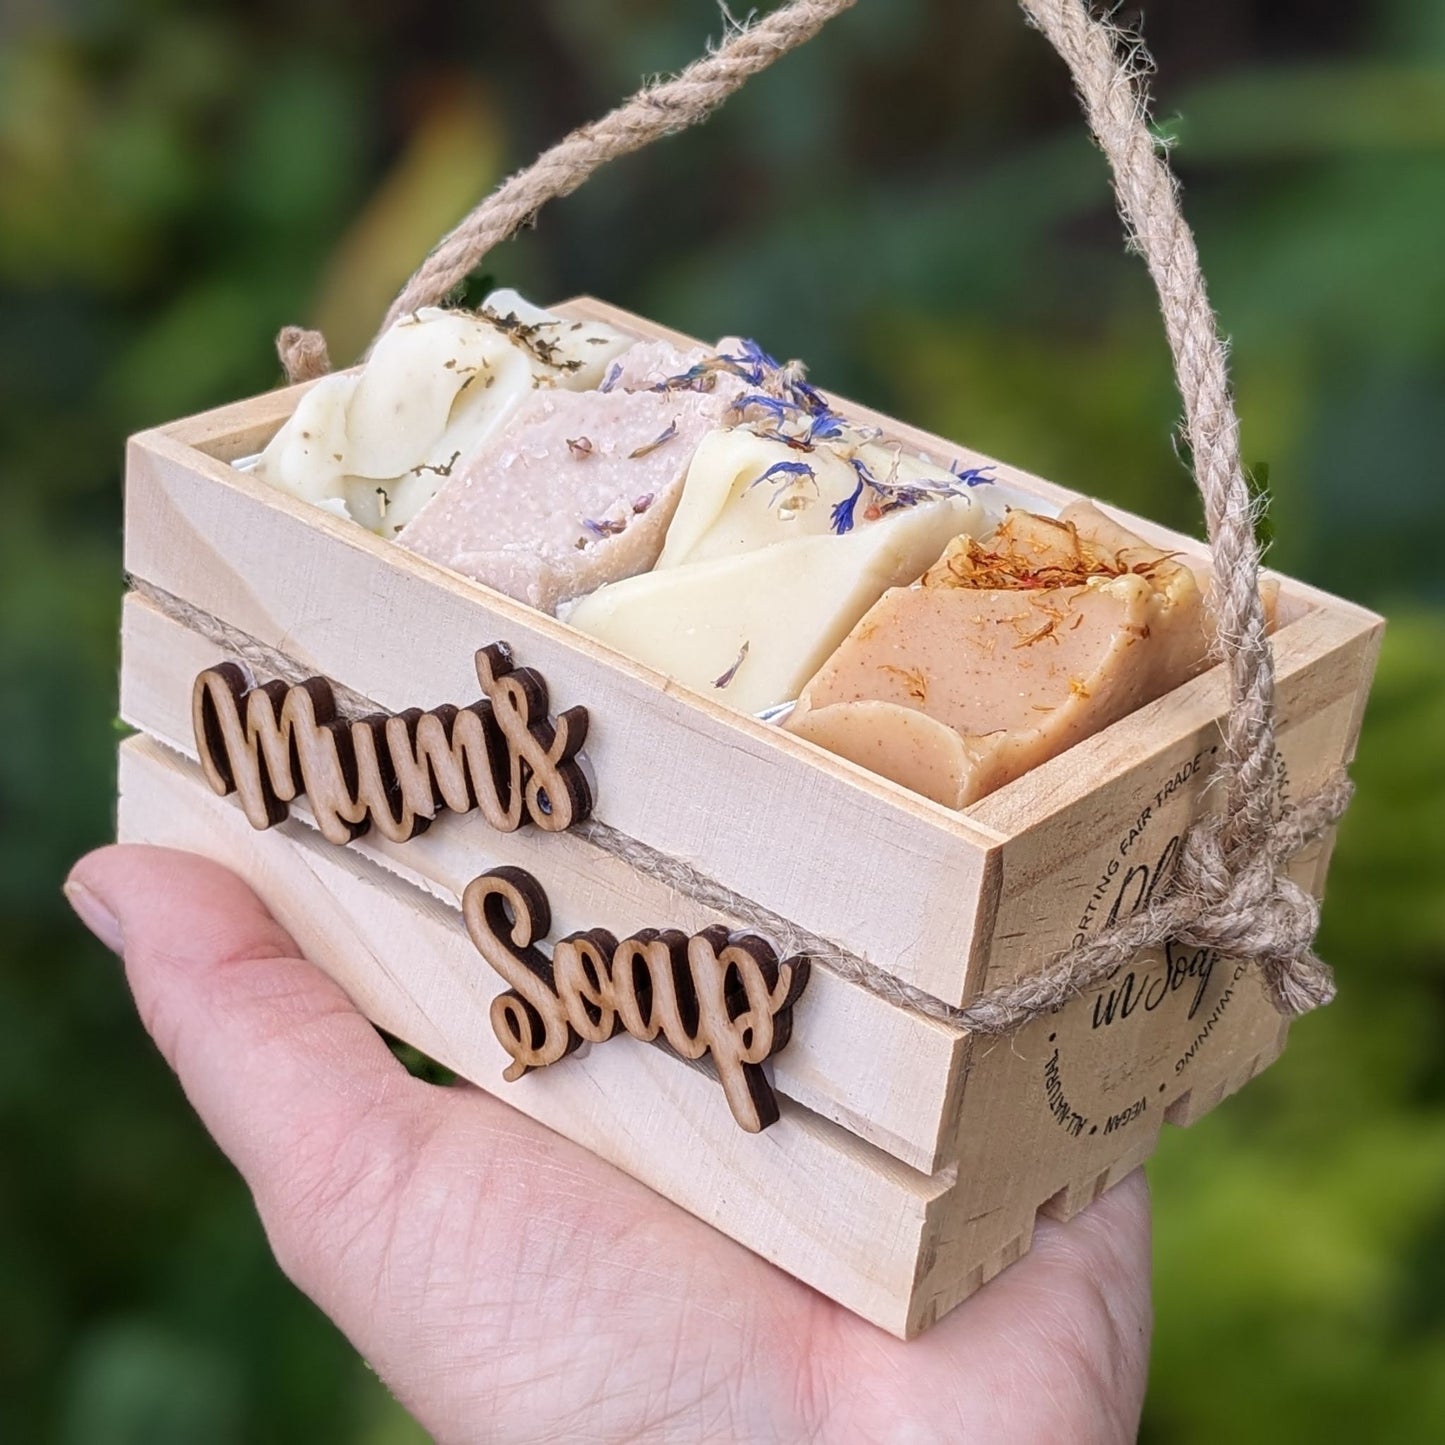 Wooden crate for mum's soap with handmade soap bars